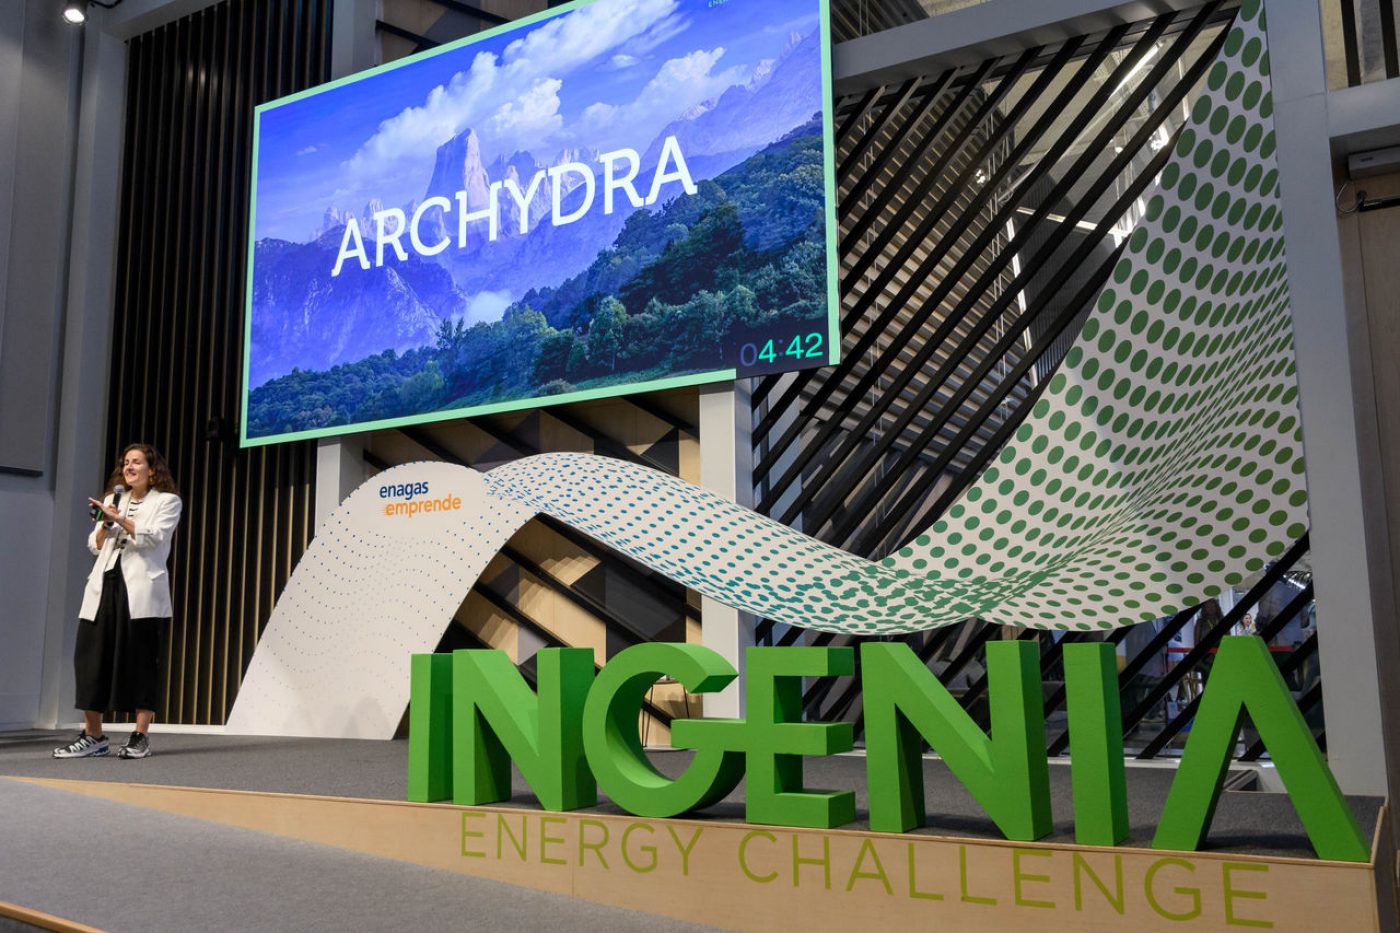 Finalist of Archydra project